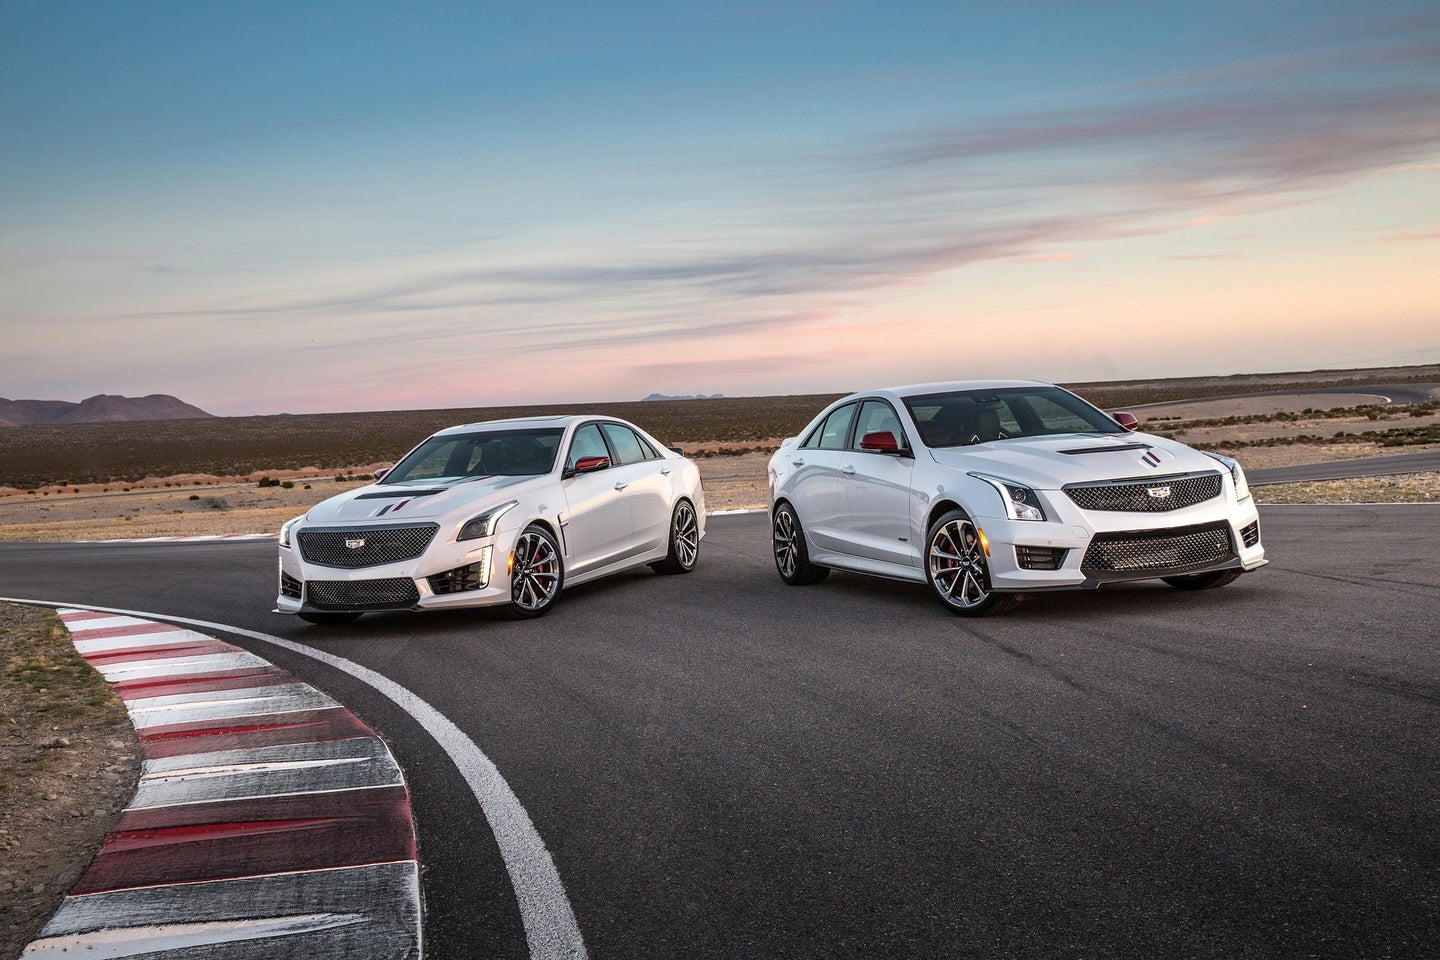 Special Championship Edition Cadillac CTS-V and ATS-V Coming to Dealers